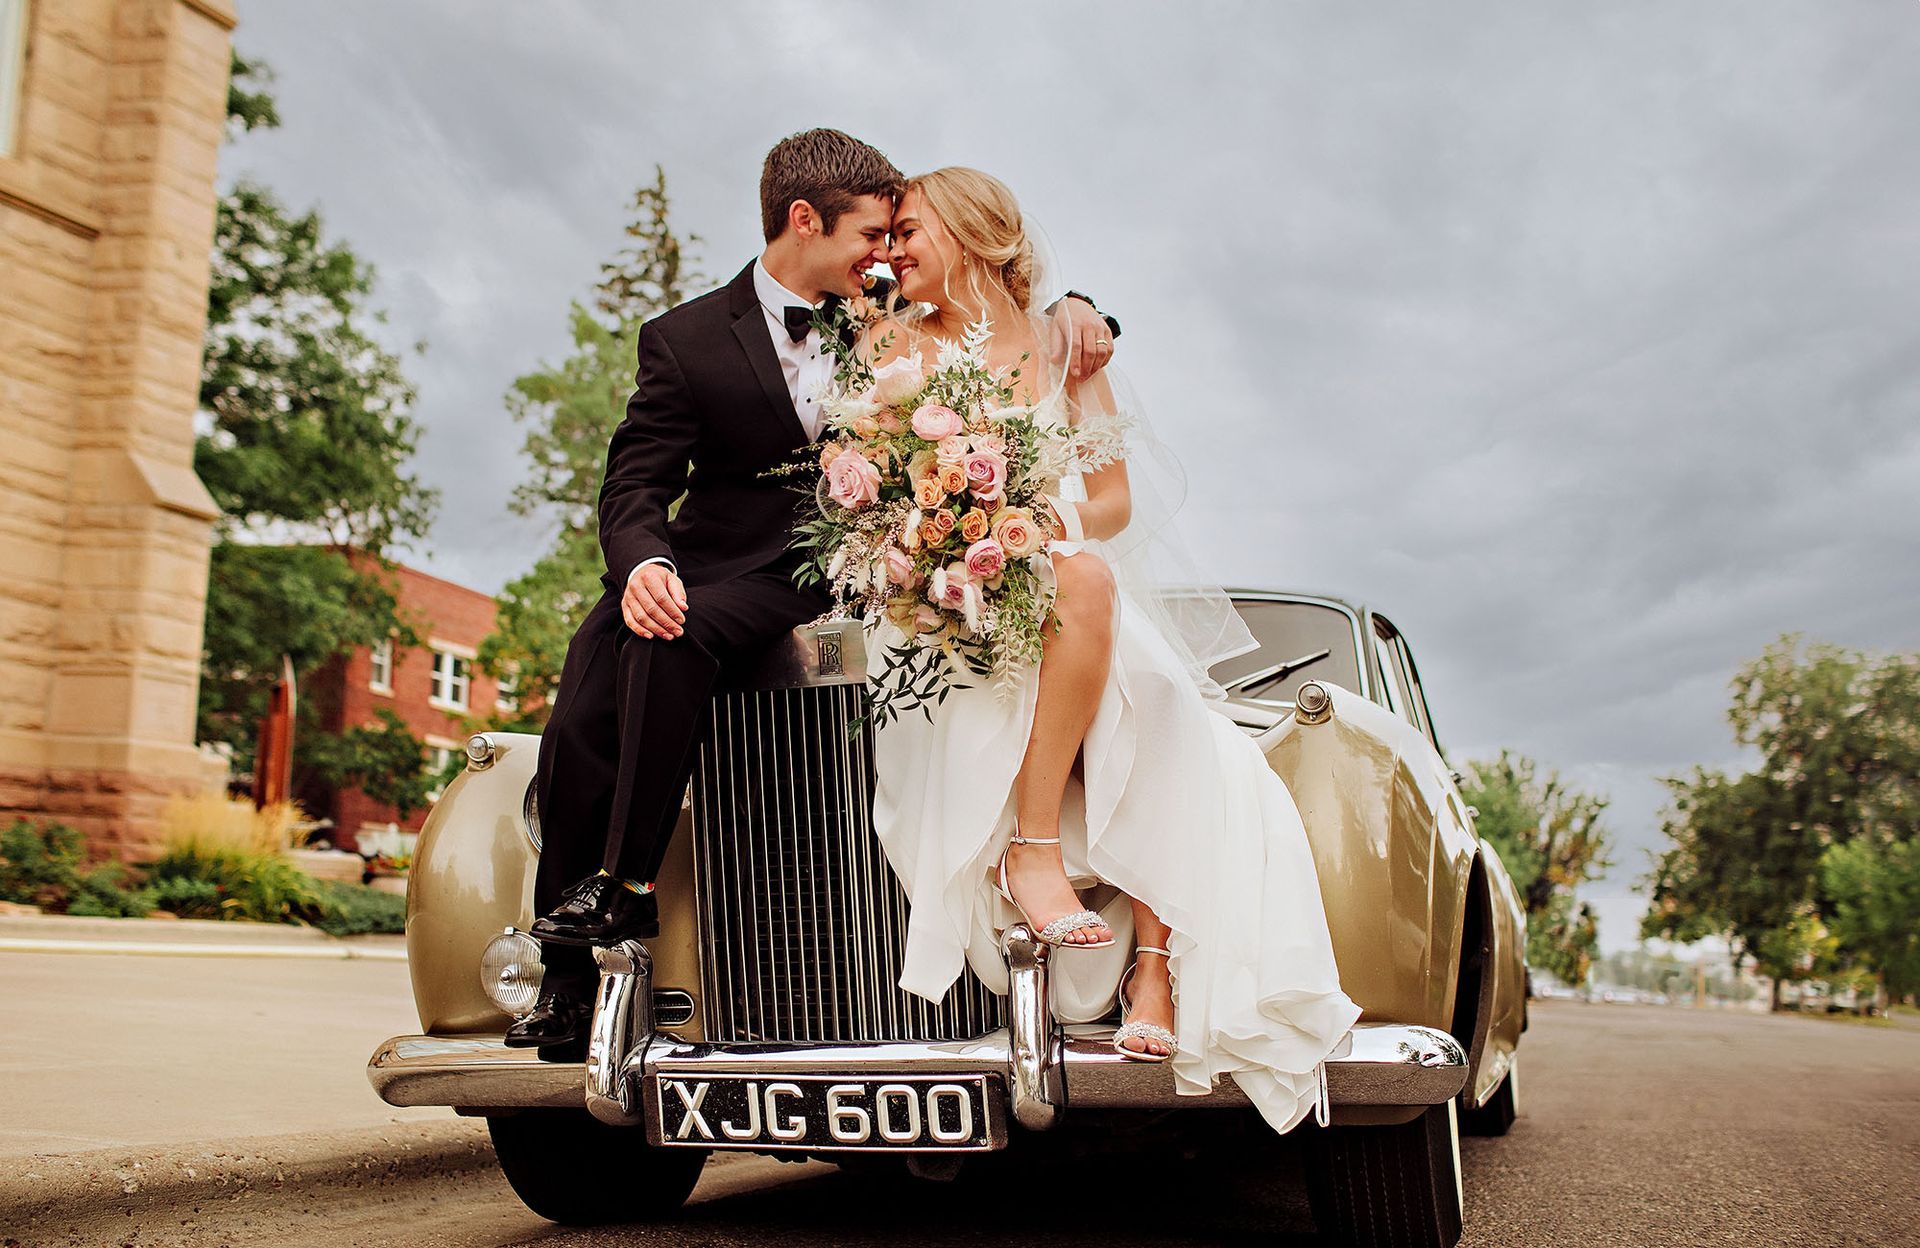 A bride and groom are kissing in a vintage car.